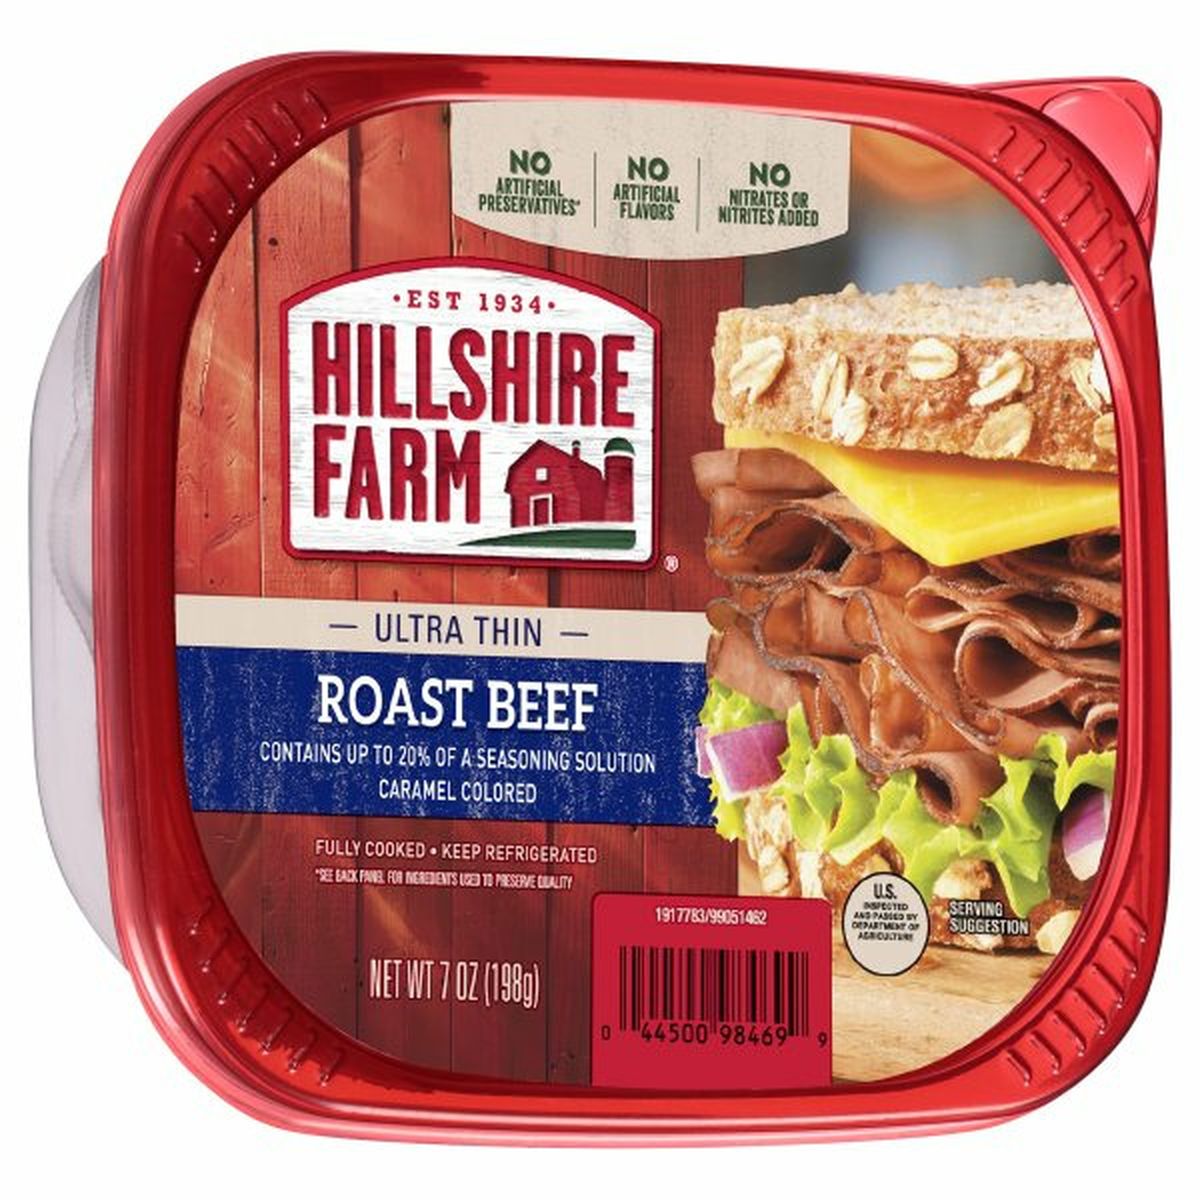 Calories in Hillshire Farm Ultra Thin Roast Beef Lunch Meat